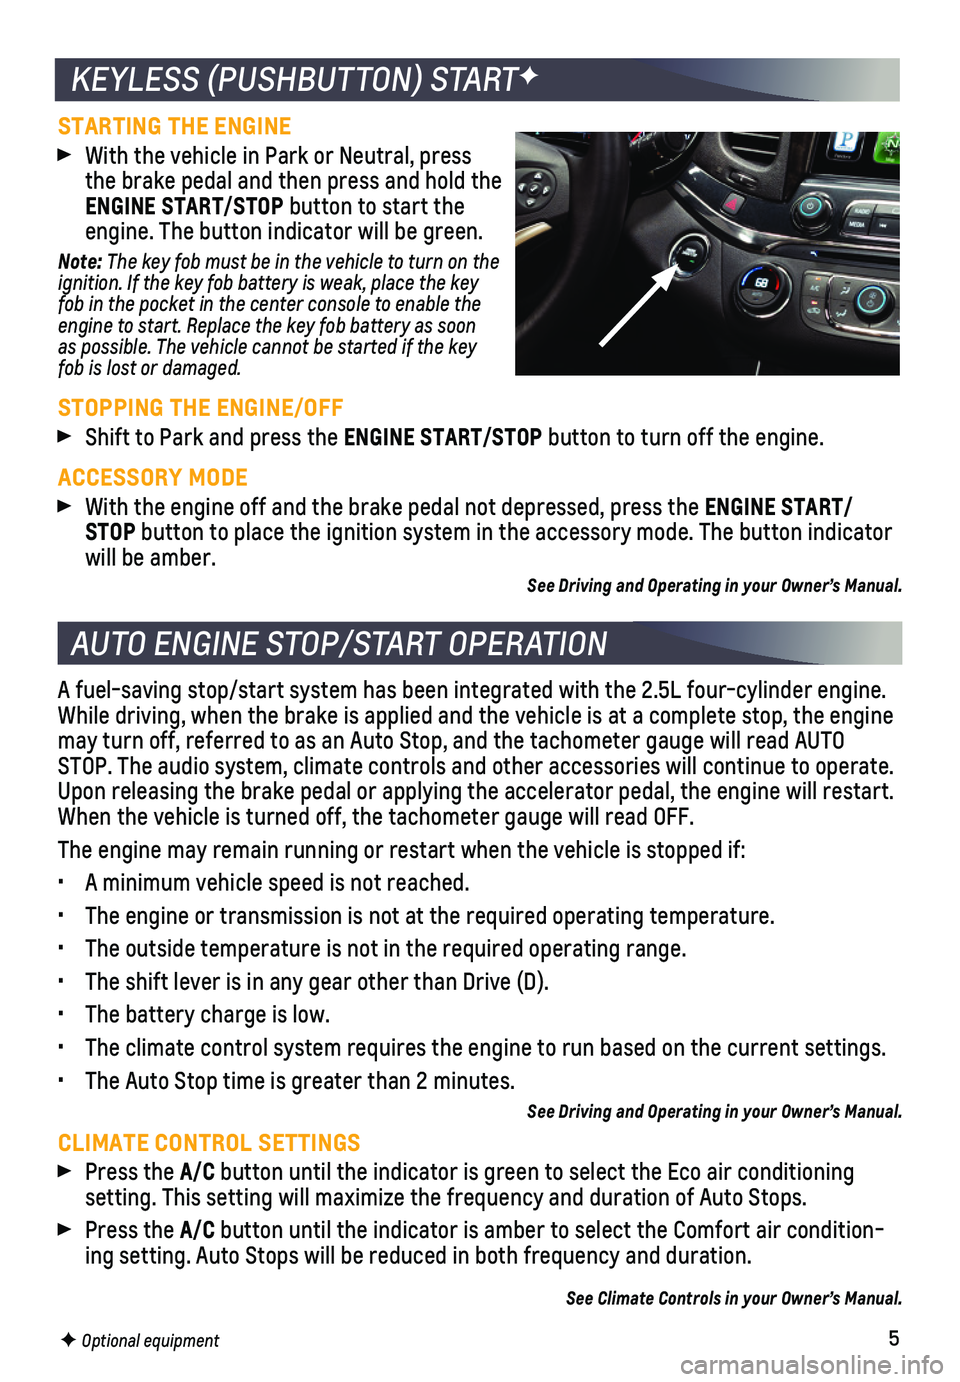 CHEVROLET IMPALA 2018  Get To Know Guide 5
AUTO ENGINE STOP/START OPERATION
A fuel-saving stop/start system has been integrated with the 2.5L four-c\
ylinder engine. While driving, when the brake is applied and the vehicle is at a complet\
e